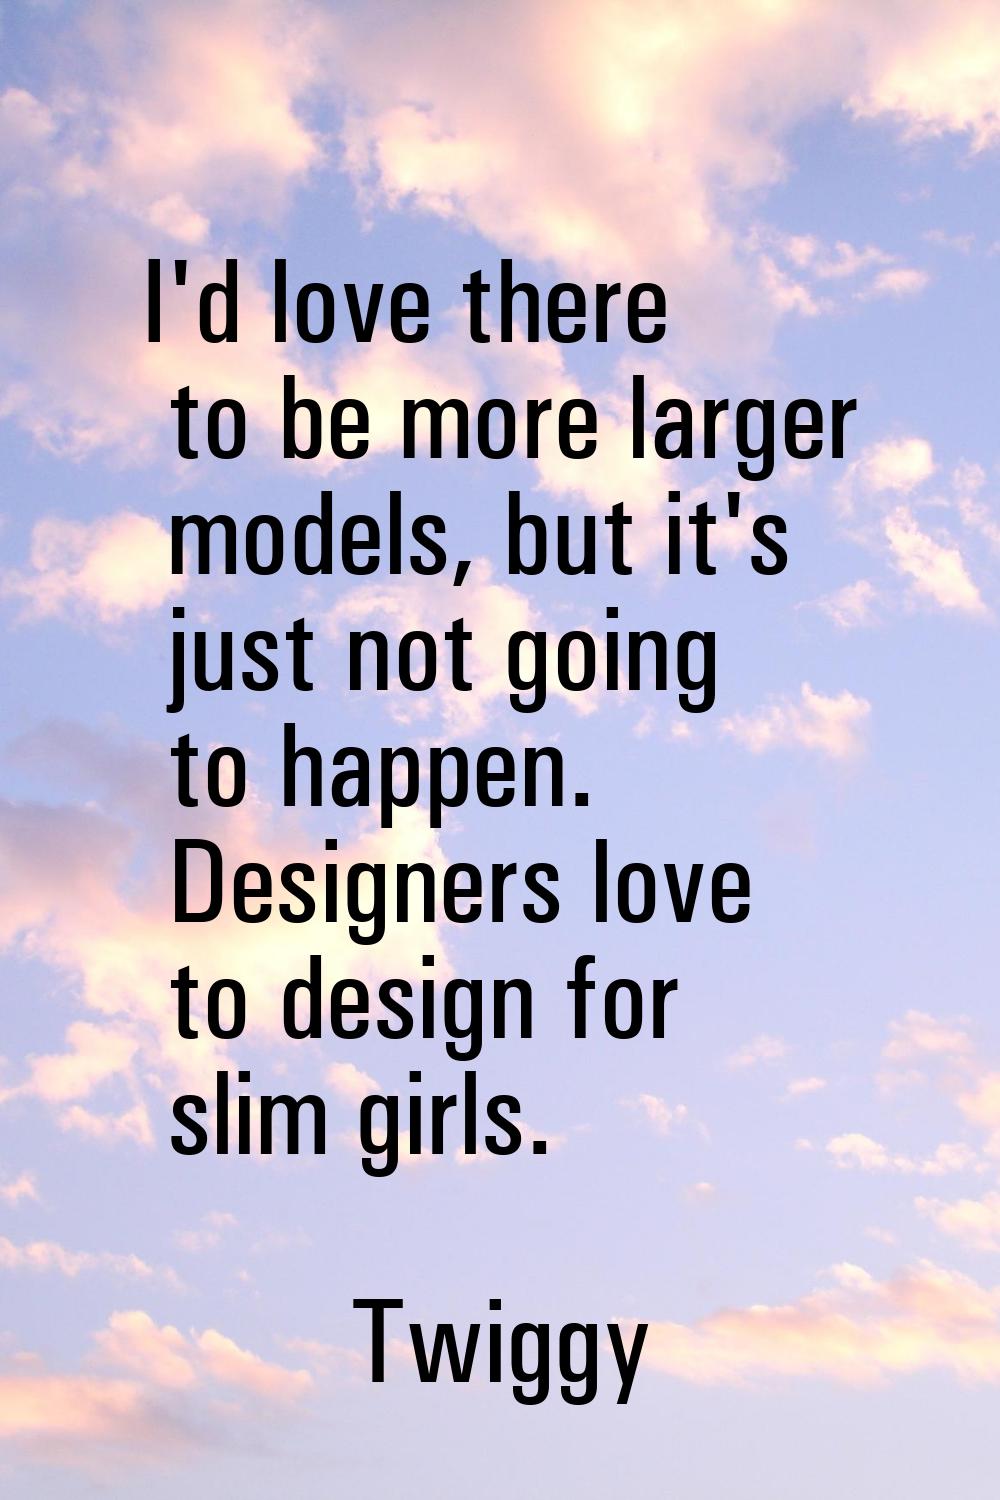 I'd love there to be more larger models, but it's just not going to happen. Designers love to desig